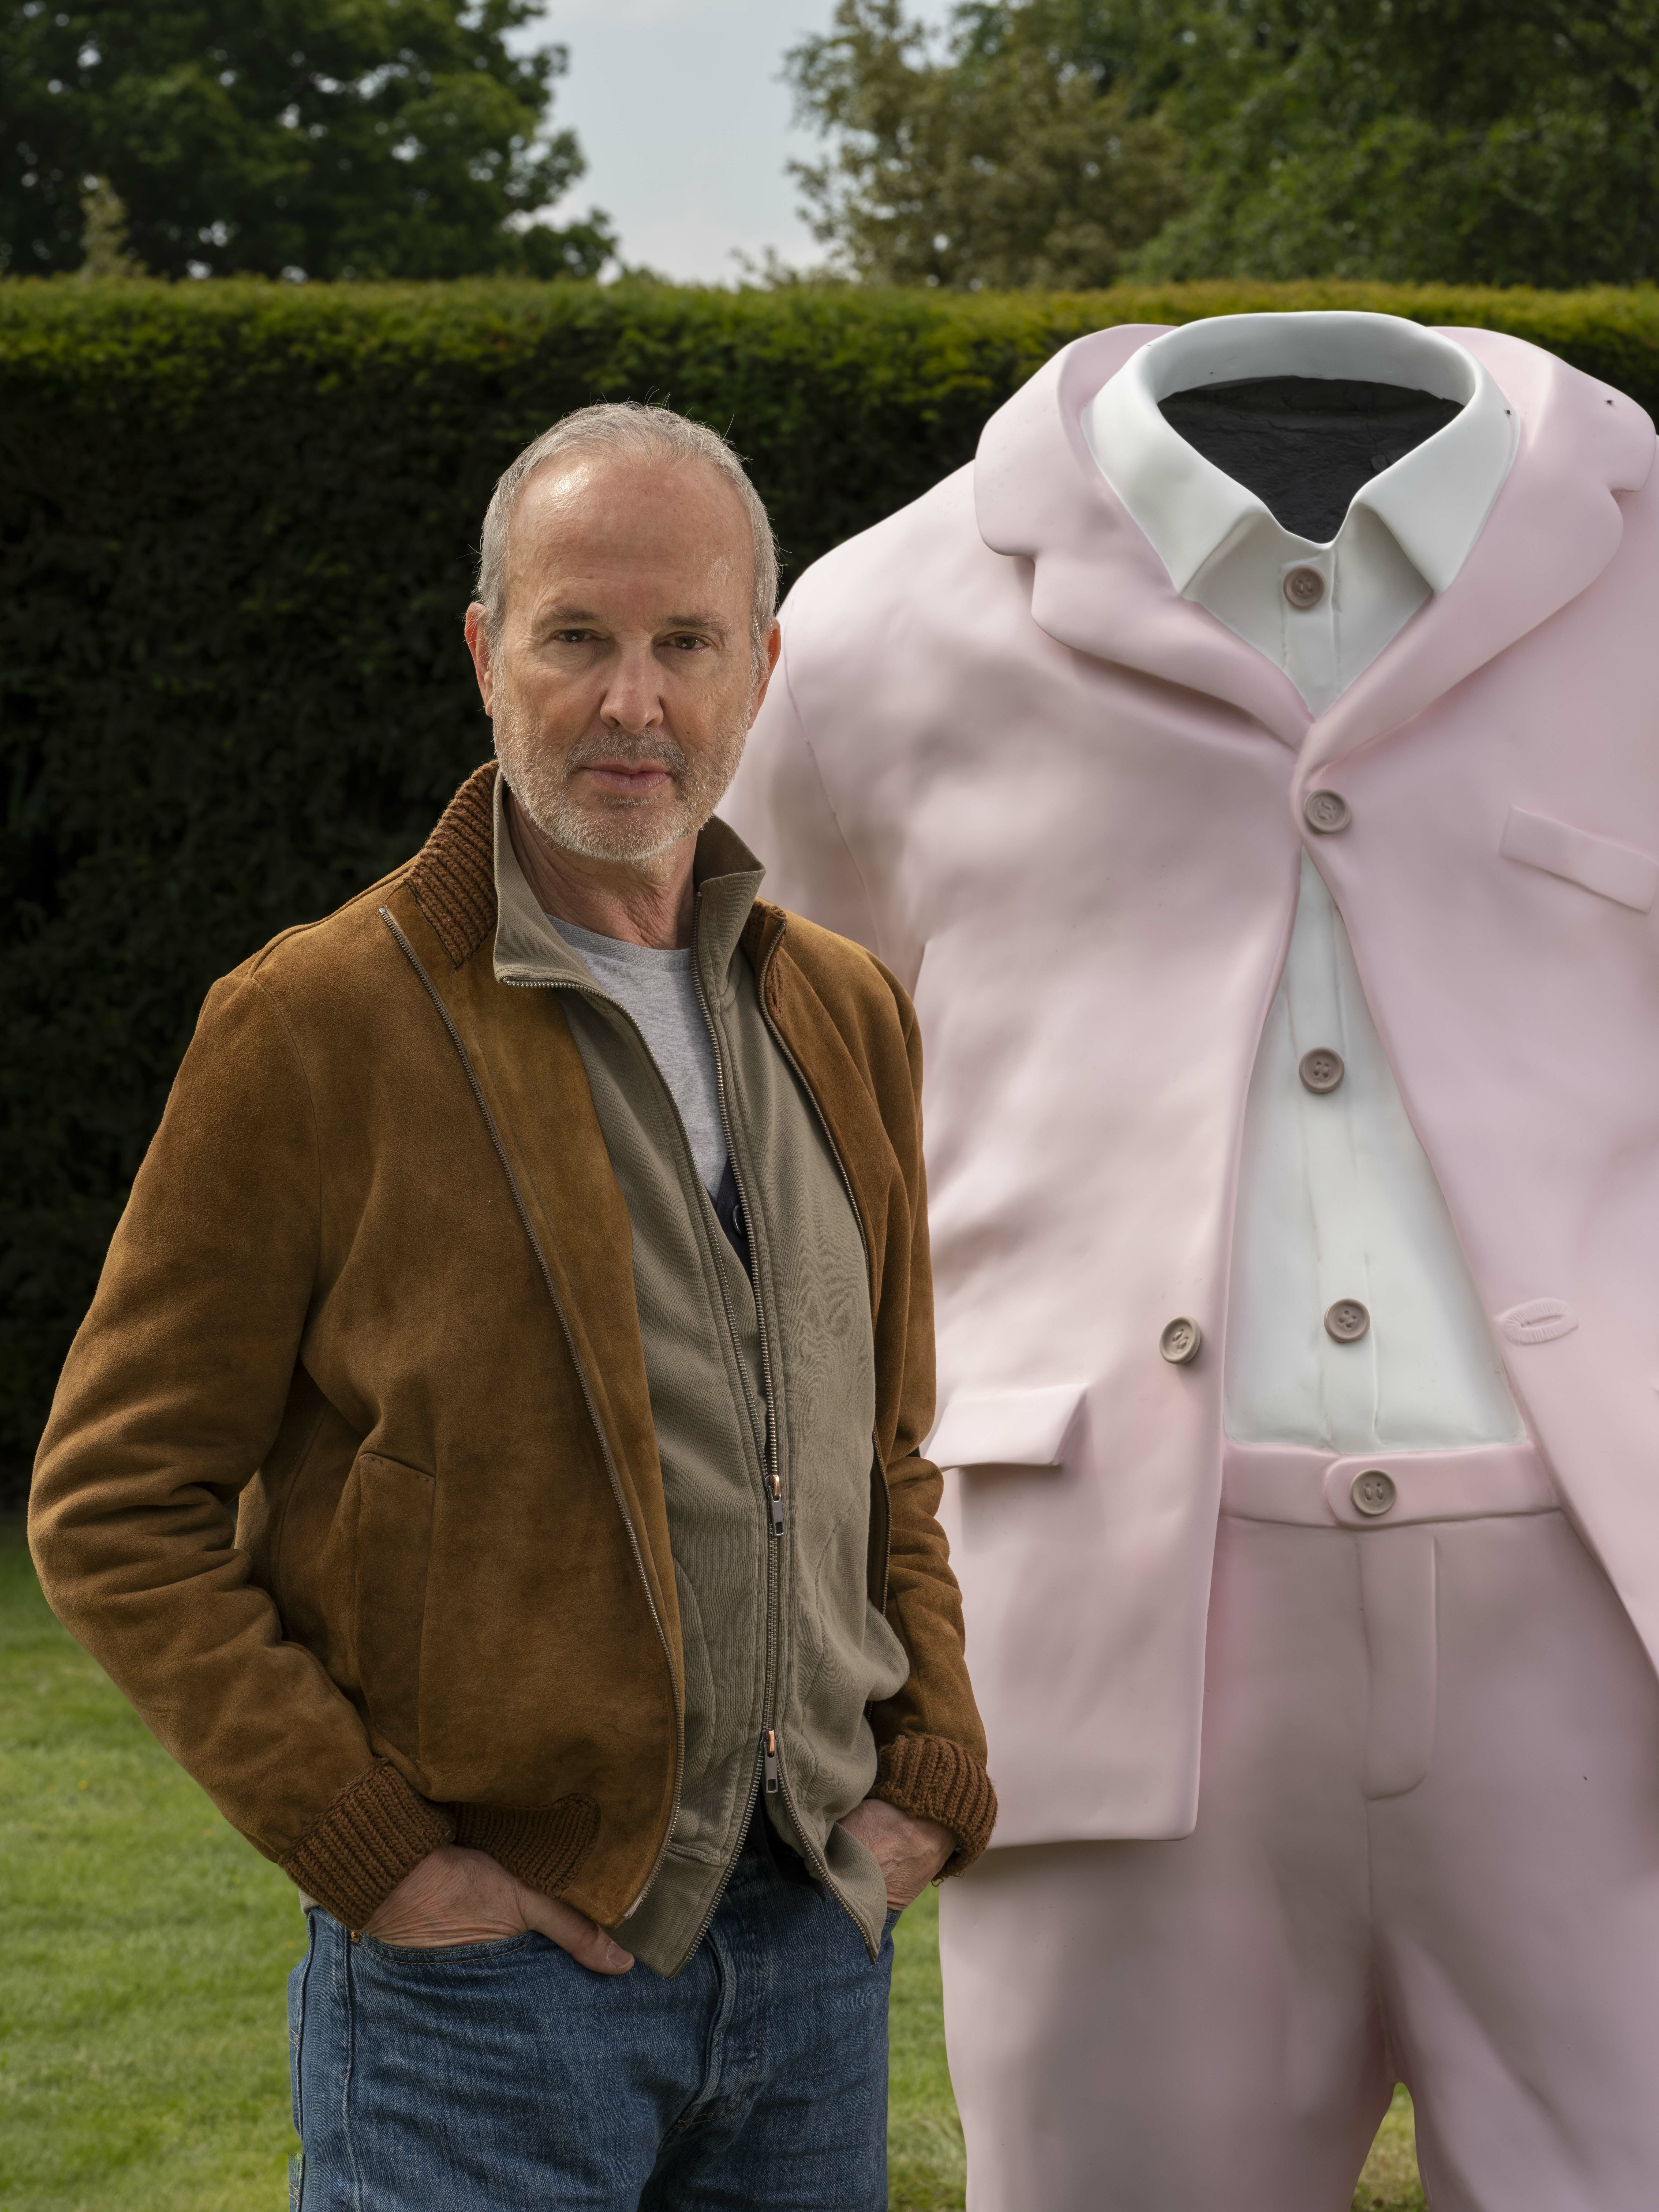 Man stood in front of sculpture of a pink suit